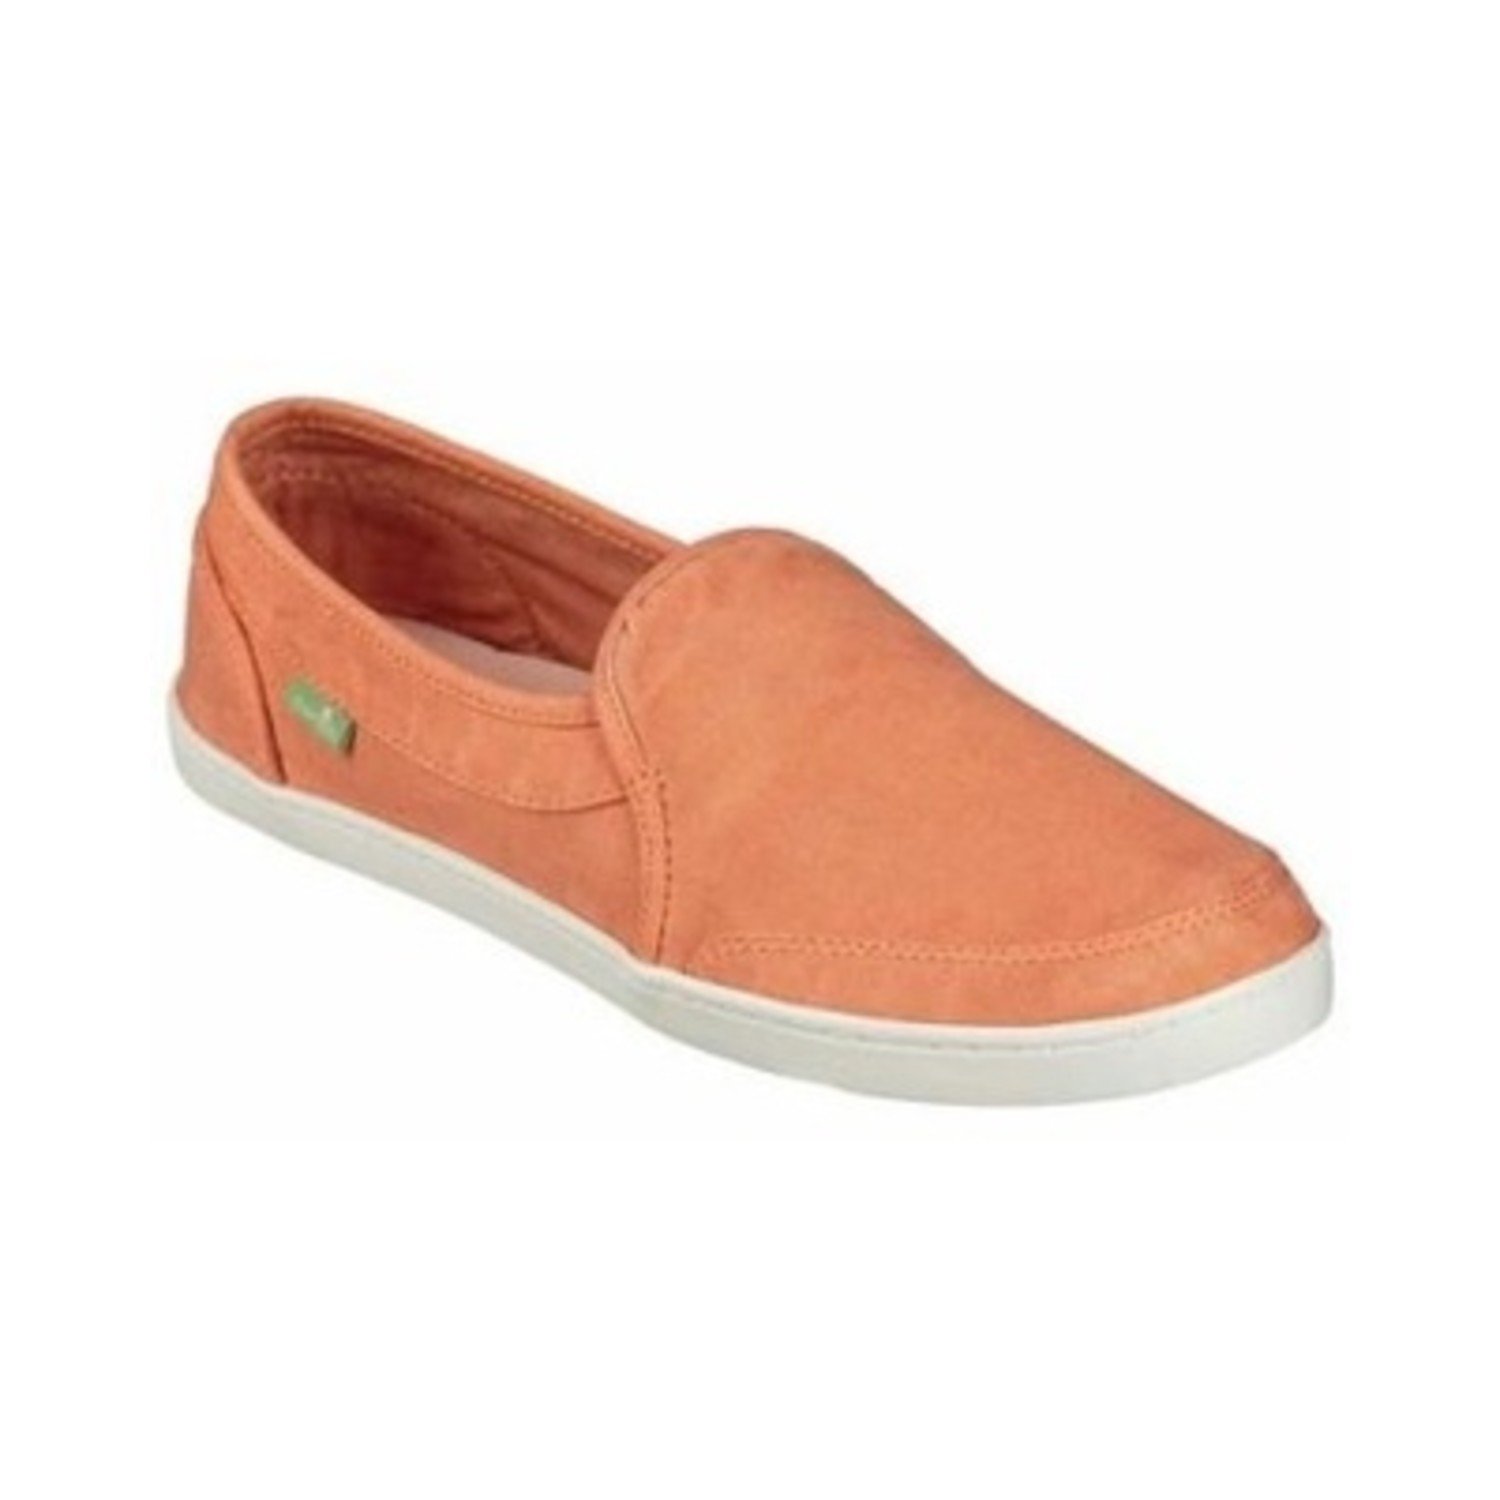 Sanuk Women's Pair O Dice Slip On Shoes - Coral - Medicine Hat-The Boarding  House